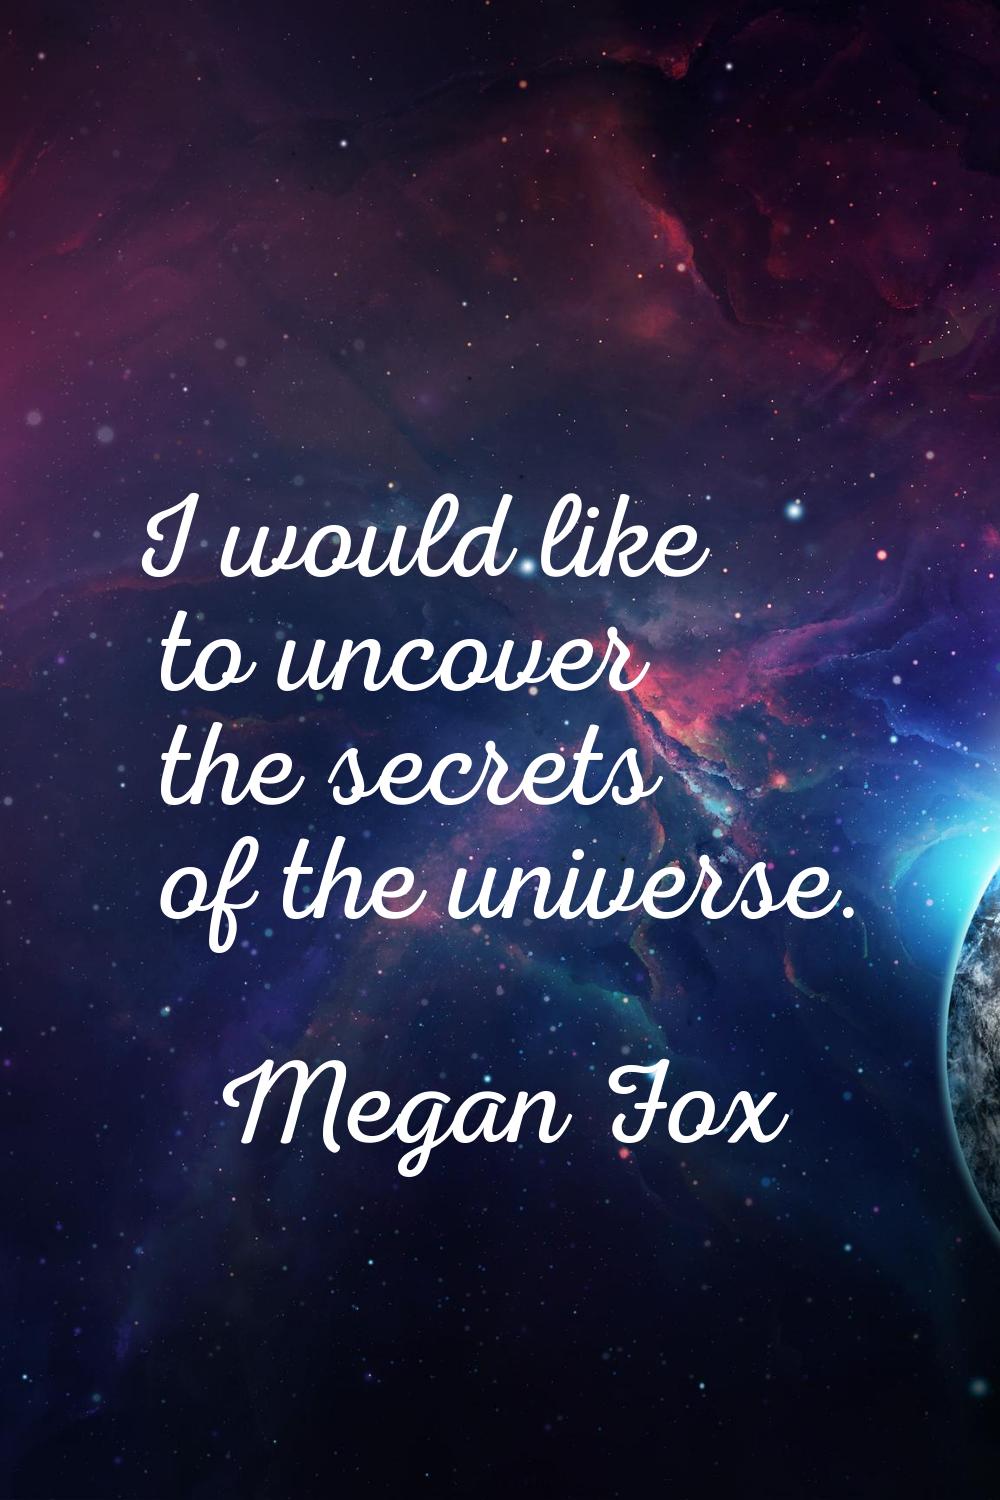 I would like to uncover the secrets of the universe.